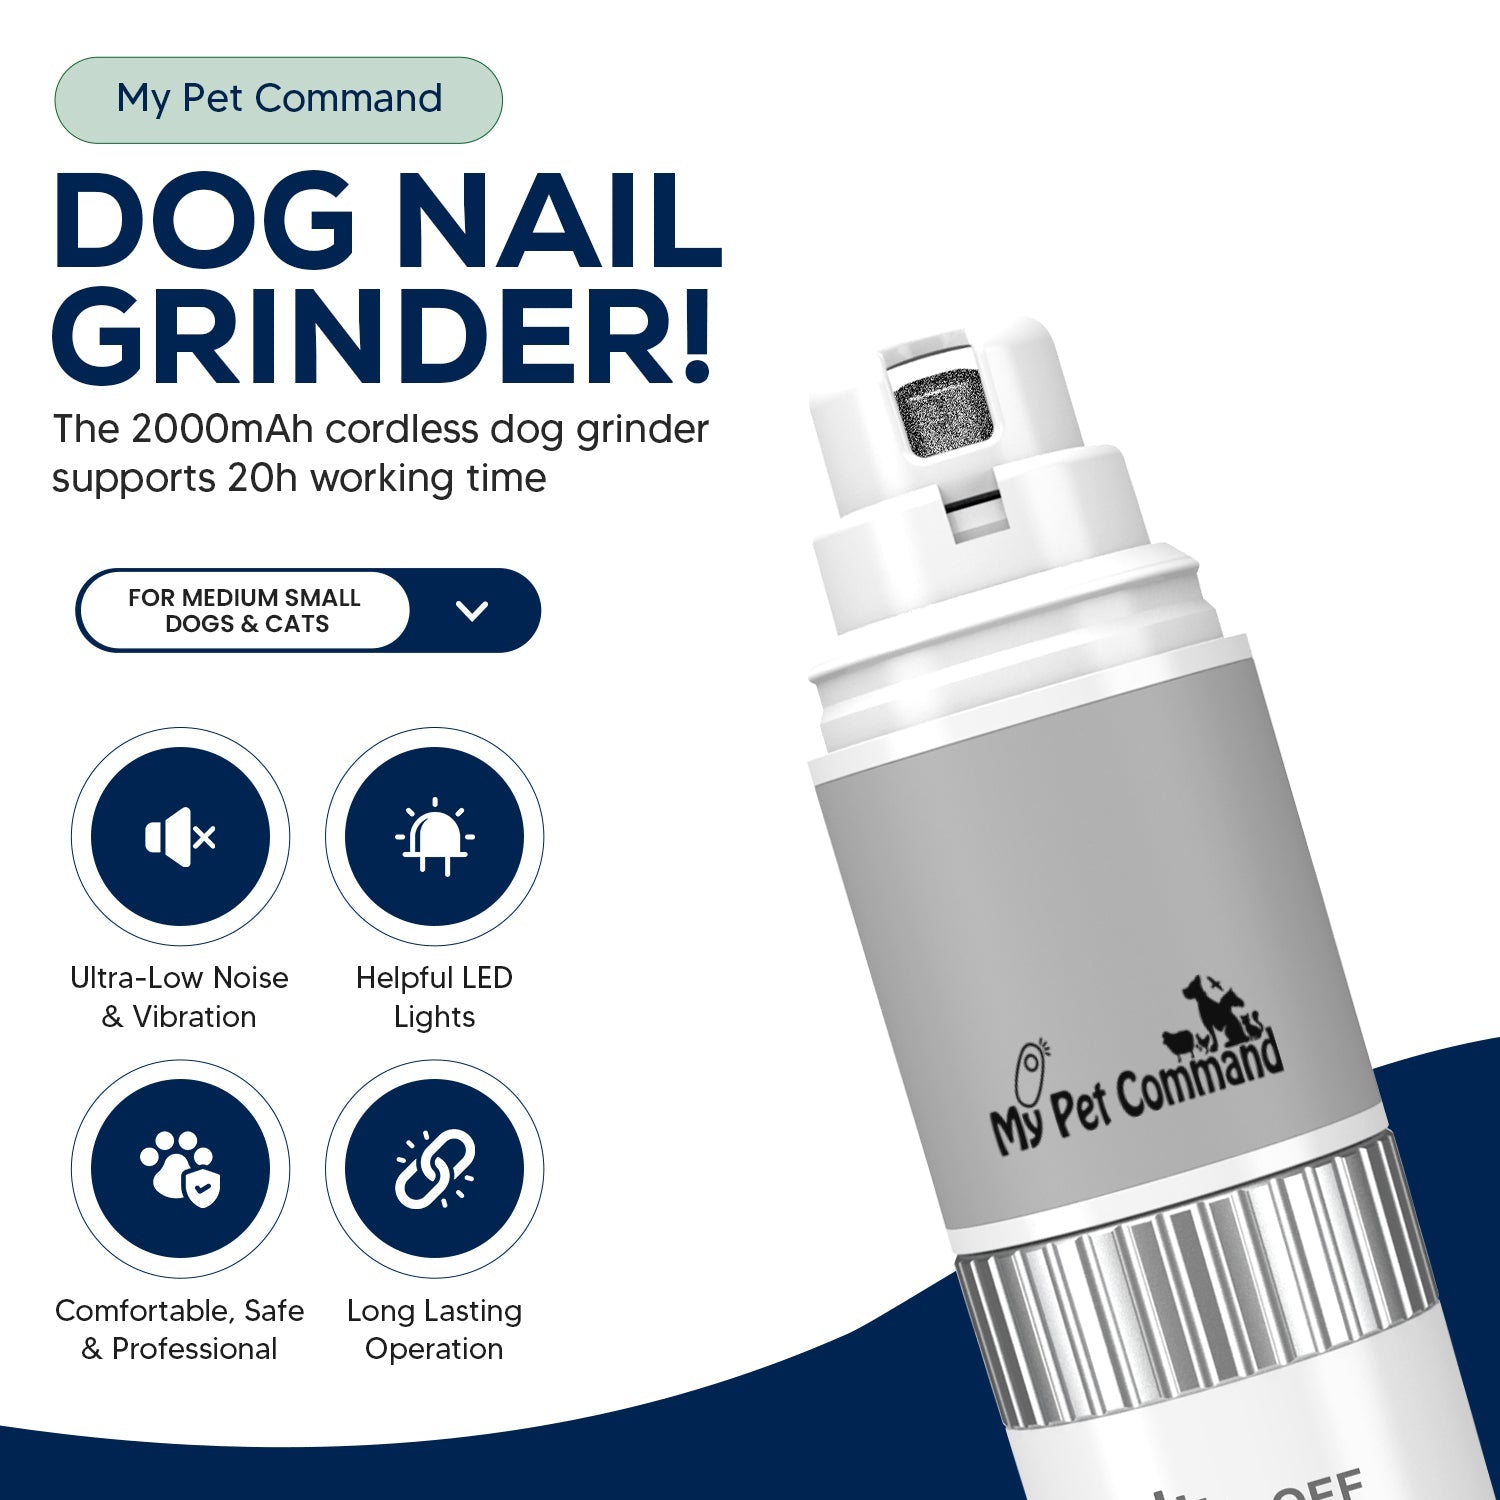 My Pet Command Cordless Dog Nail Grinder Low Noise for Dogs and Cats, Variable Speed Rechargeable - My Pet Command